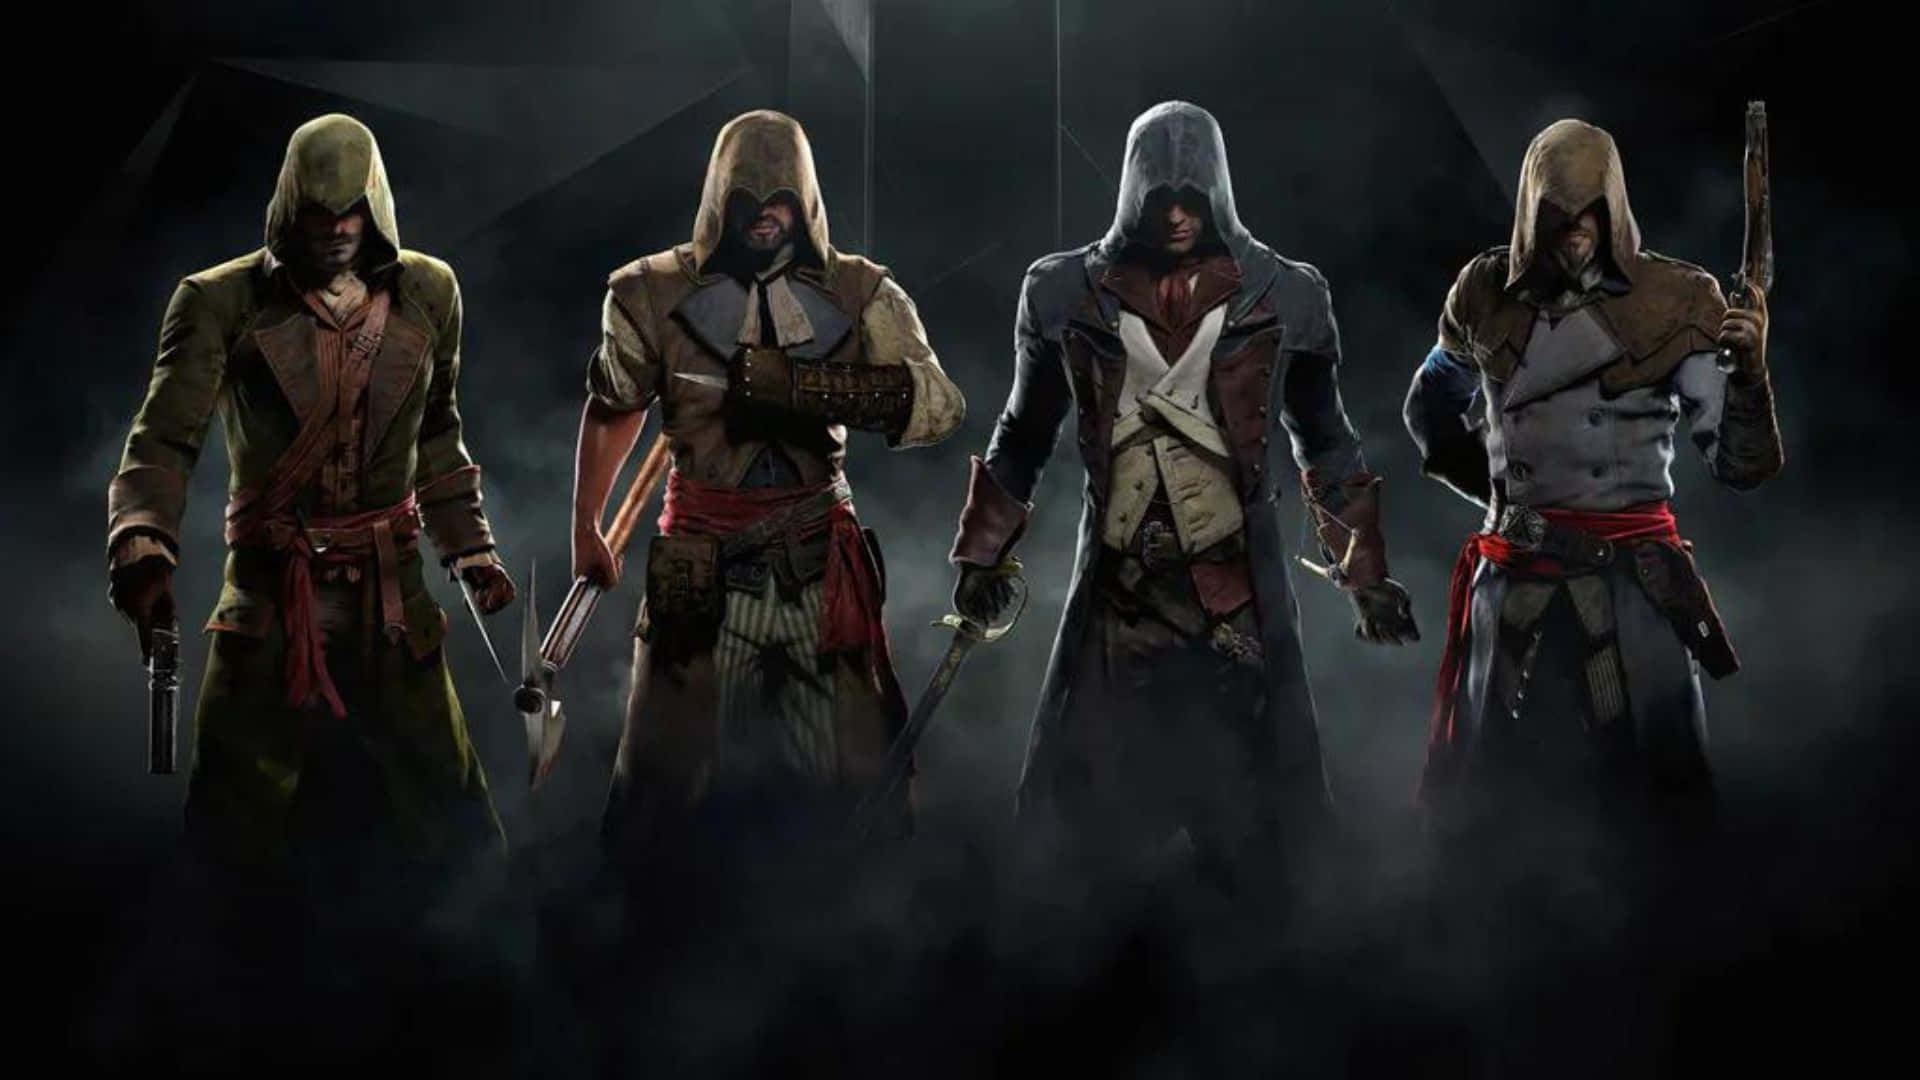 Iconic Assassin's Creed Characters Gathered in Thrilling Scene Wallpaper